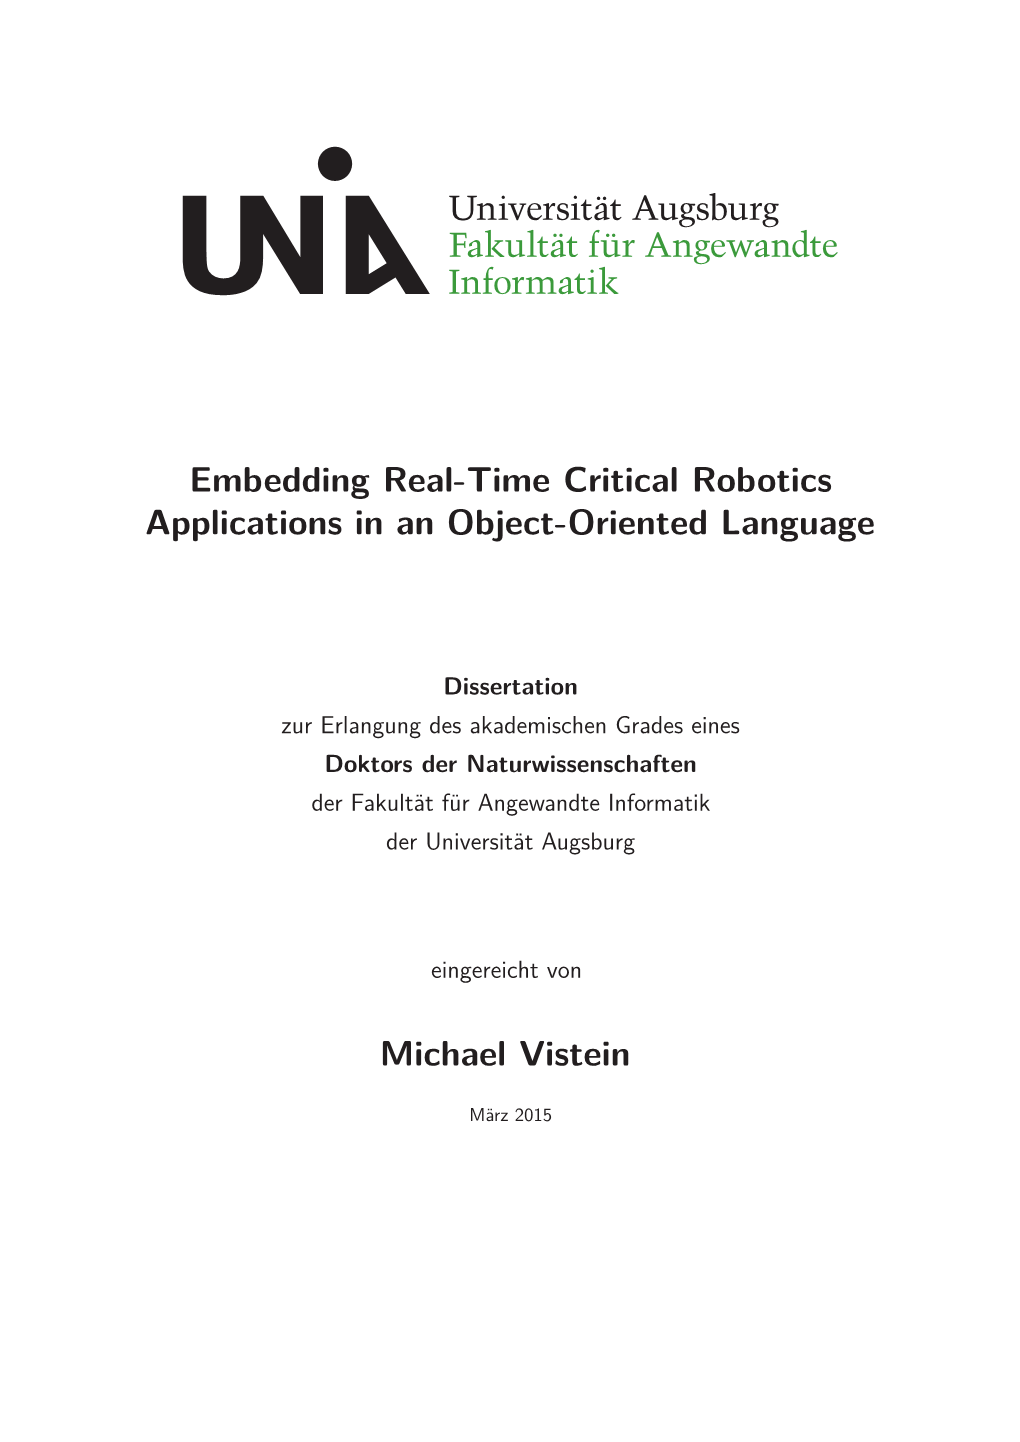 Embedding Real-Time Critical Robotics Applications in an Object-Oriented Language